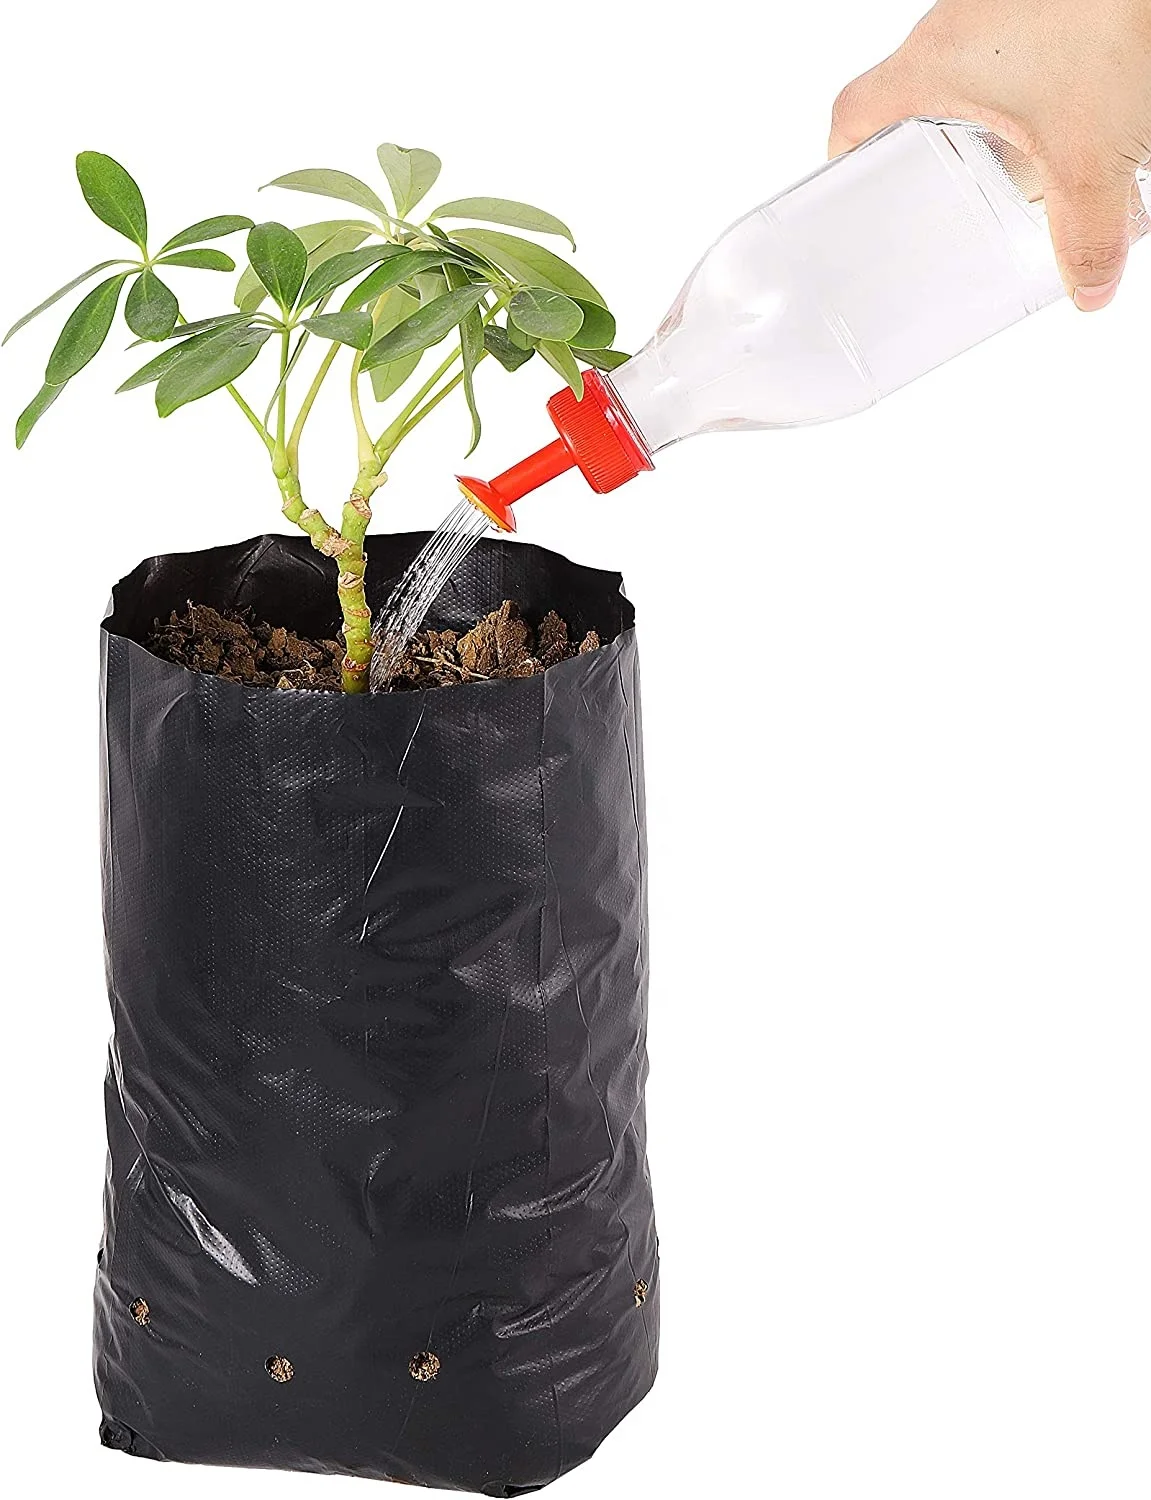 CRODOR India Plastic Grow Bags for Garden  Gardening Green Leafy  Vegetable Nursery Use at Home Terrace Kitchen Rooftop Support Plant   Saplings Flat Pack of 100 Black  Amazonin Garden 